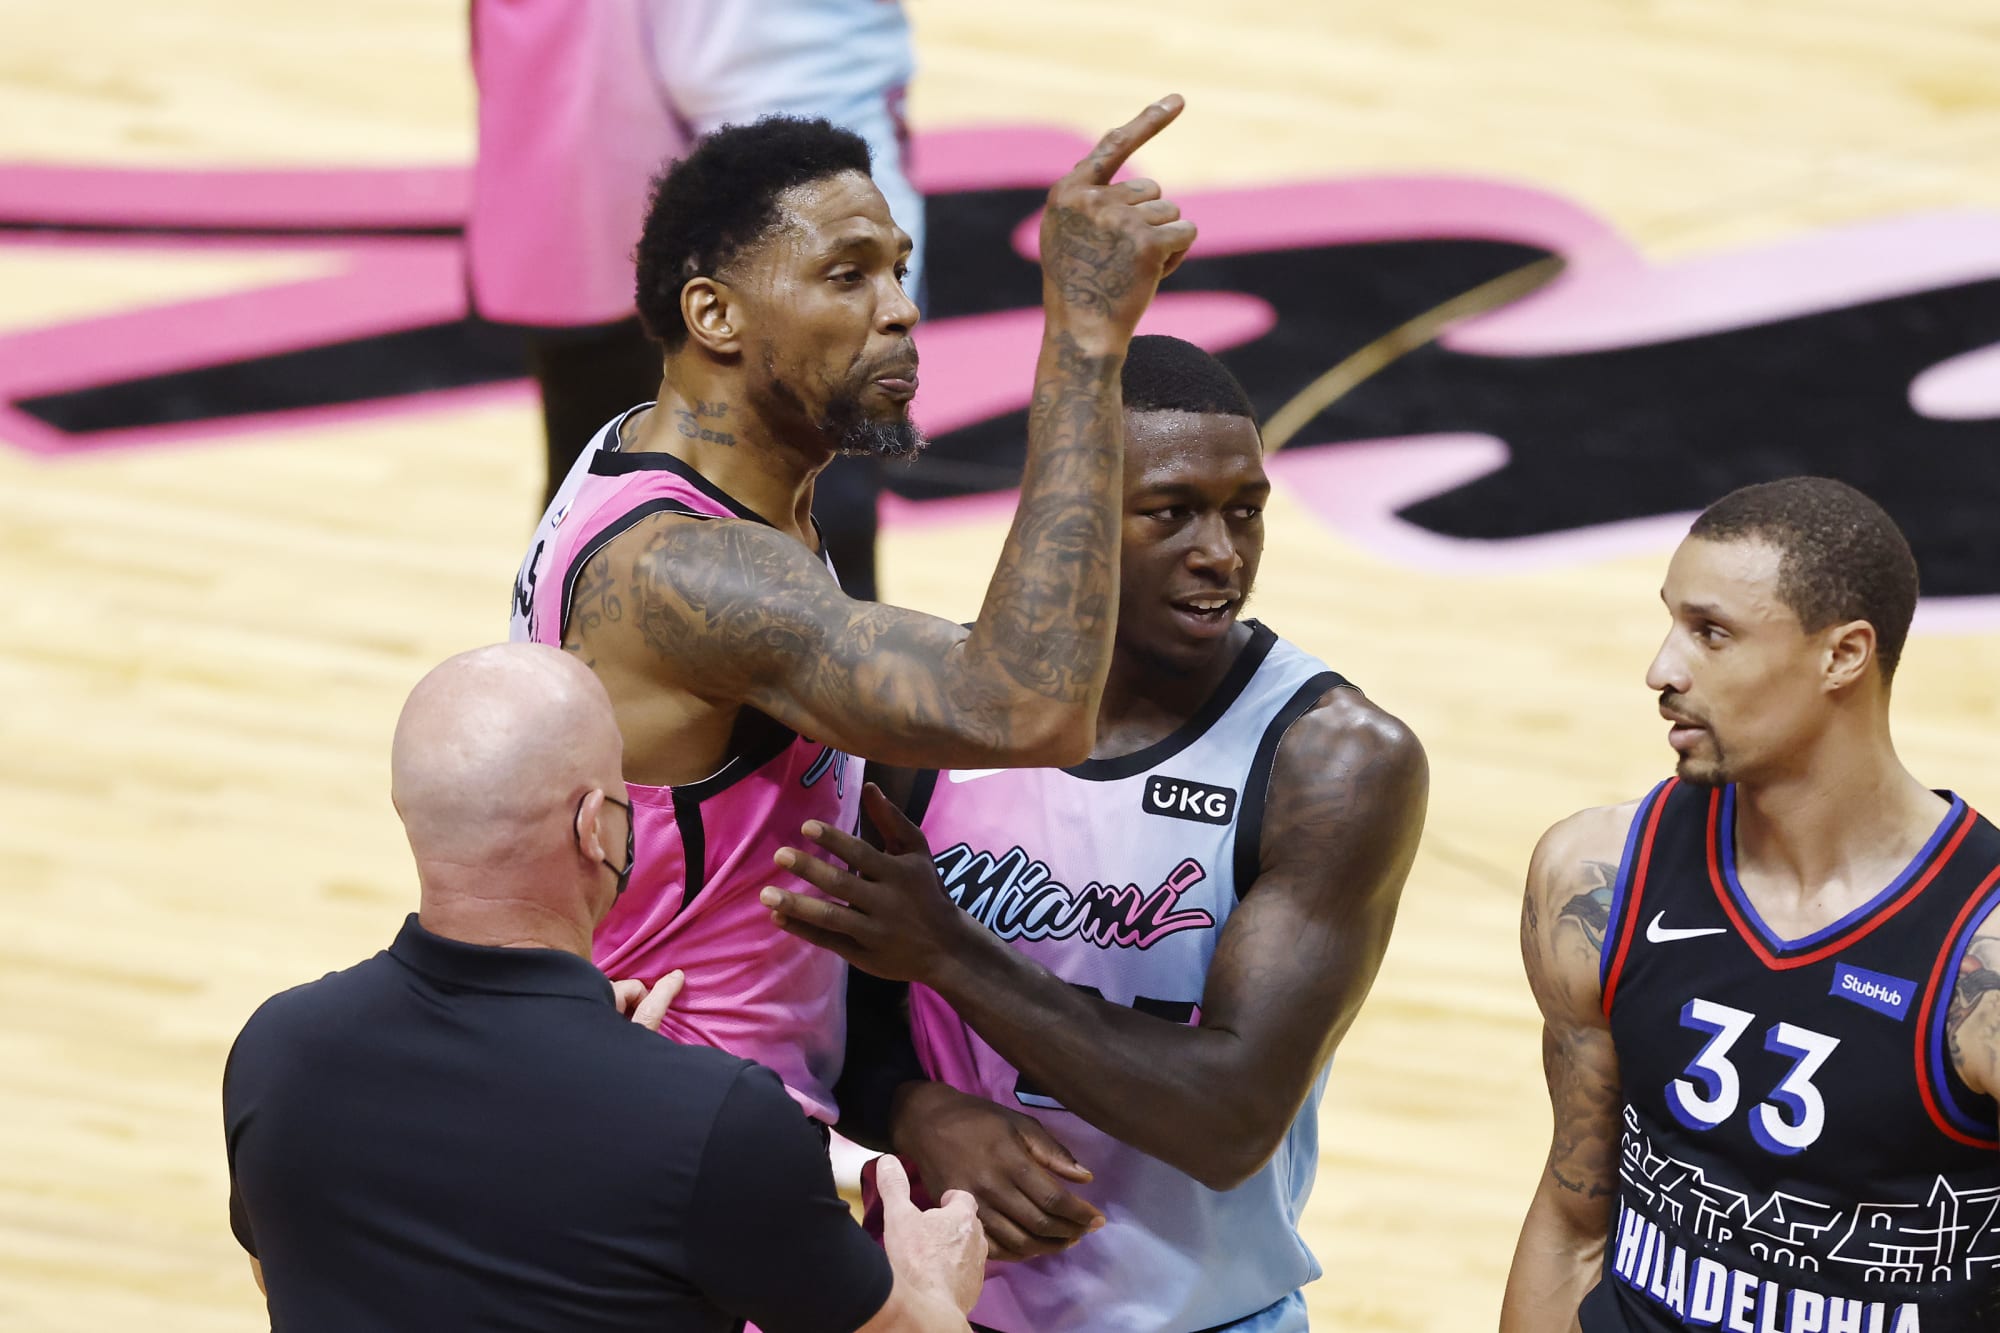 Miami Heat's Udonis Haslem Given Hilarious Retirement Gift By